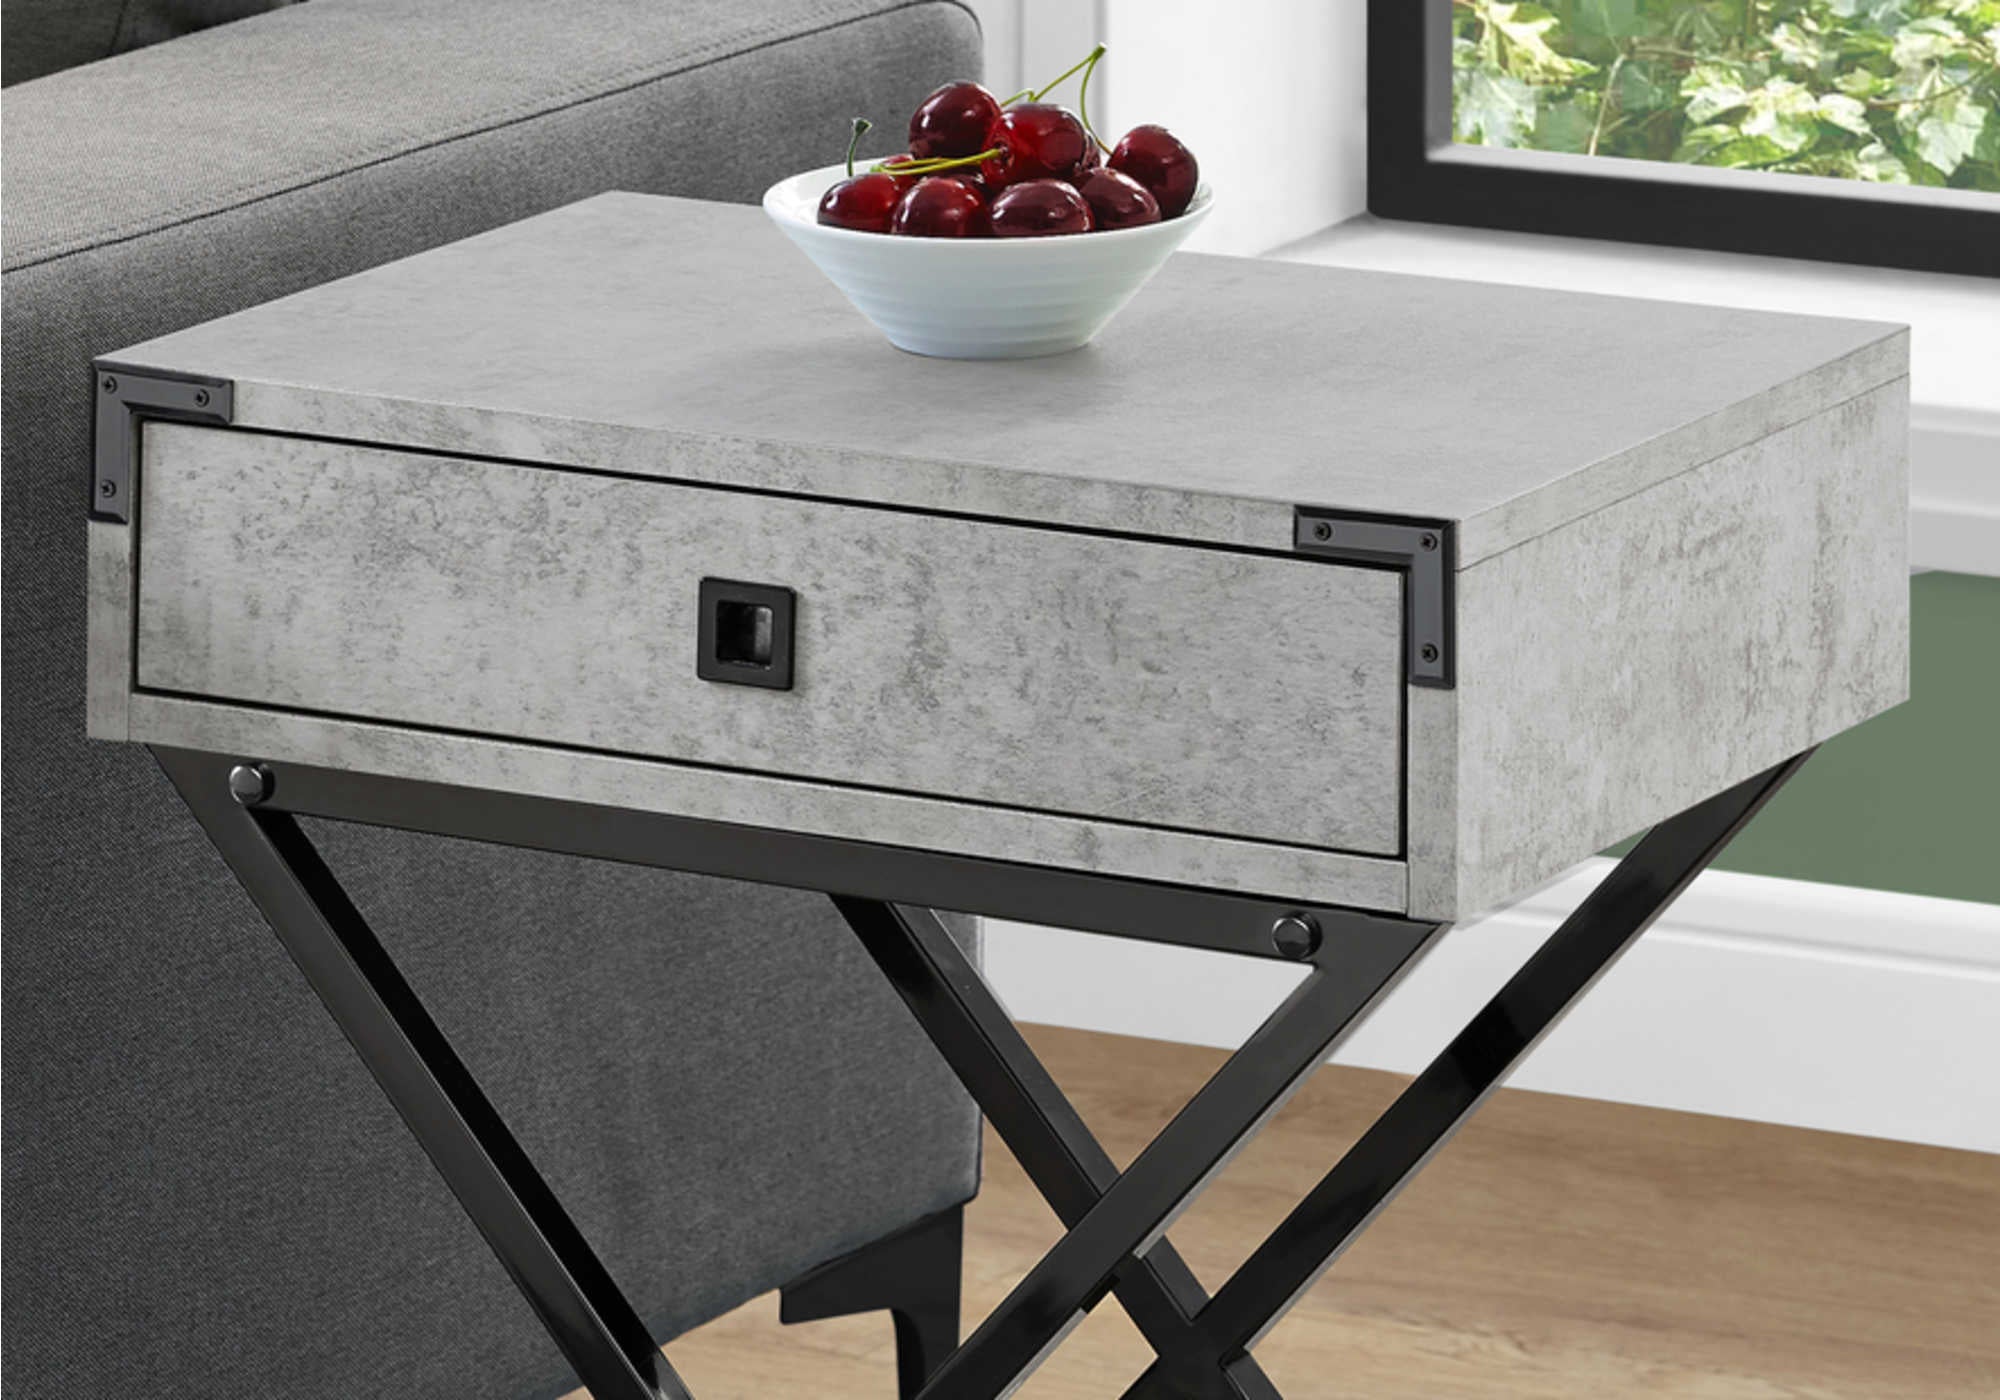 ACCENT TABLE - 24"H / GREY CEMENT / BLACK NICKEL METAL